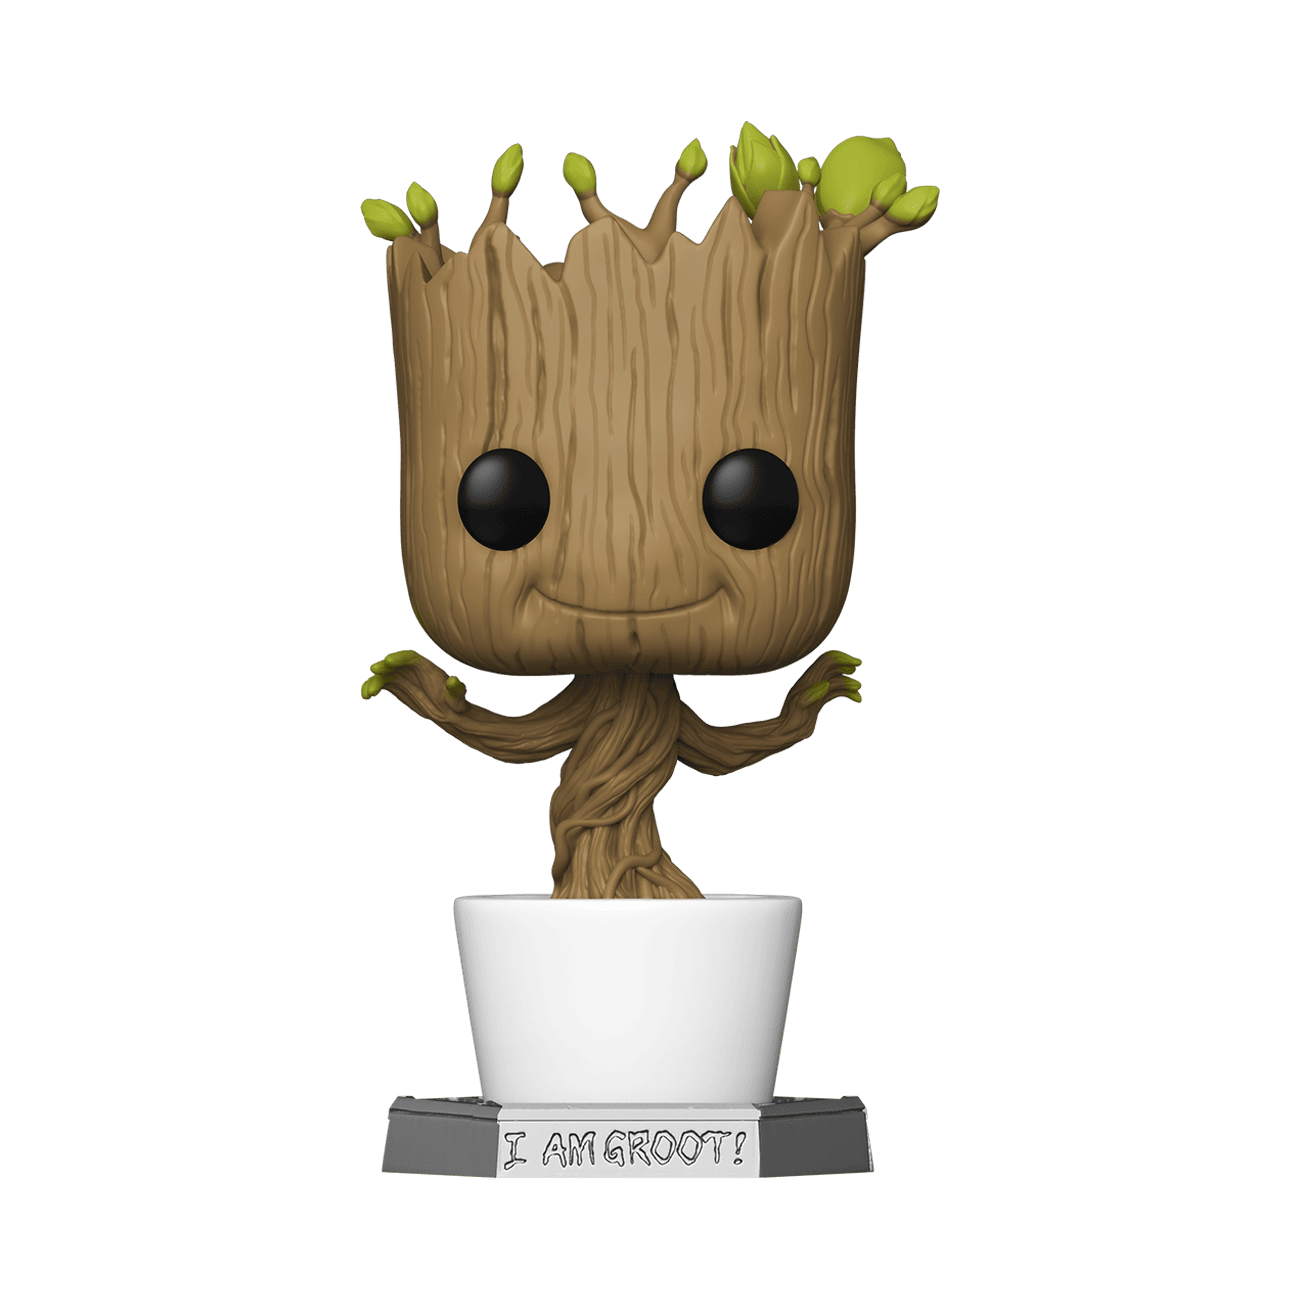 Marvel: Guardians of The Galaxy - 18" Groot, Super Sized Figure By Funko Pop!